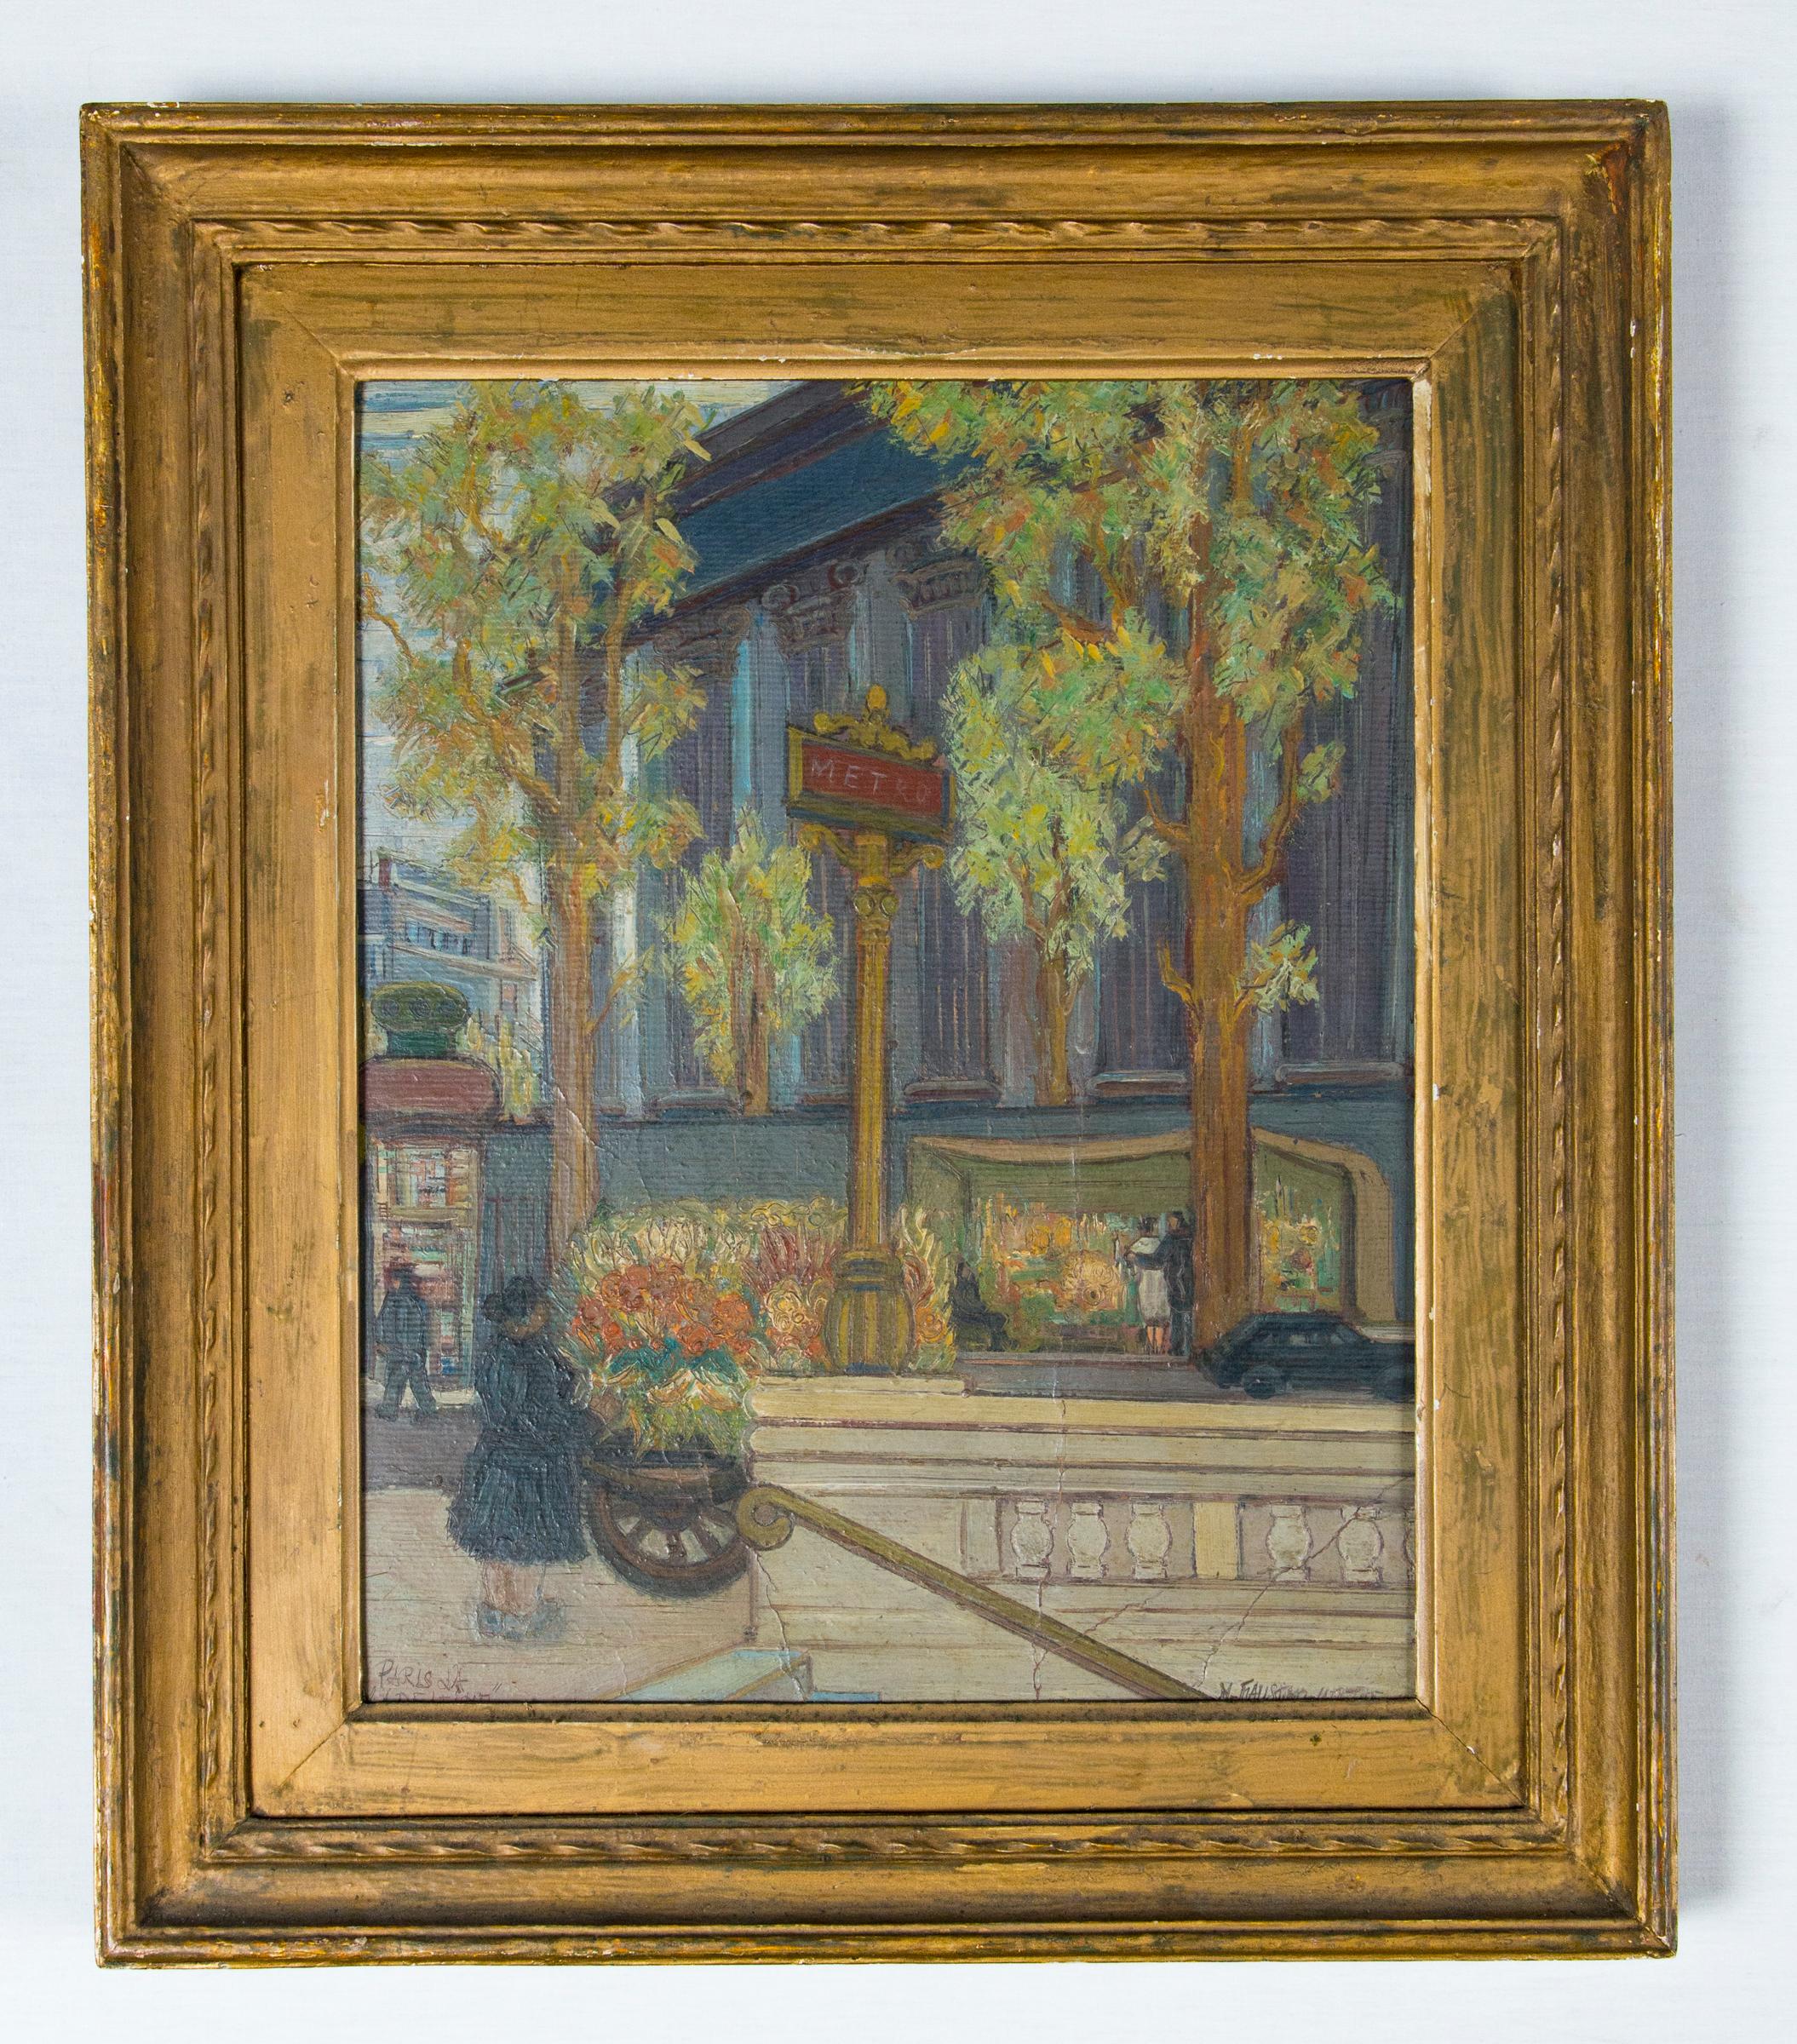 A fine midcentury Paris oil on board painting depicting the grand architecture with Parisians out and about. Signed and titled.